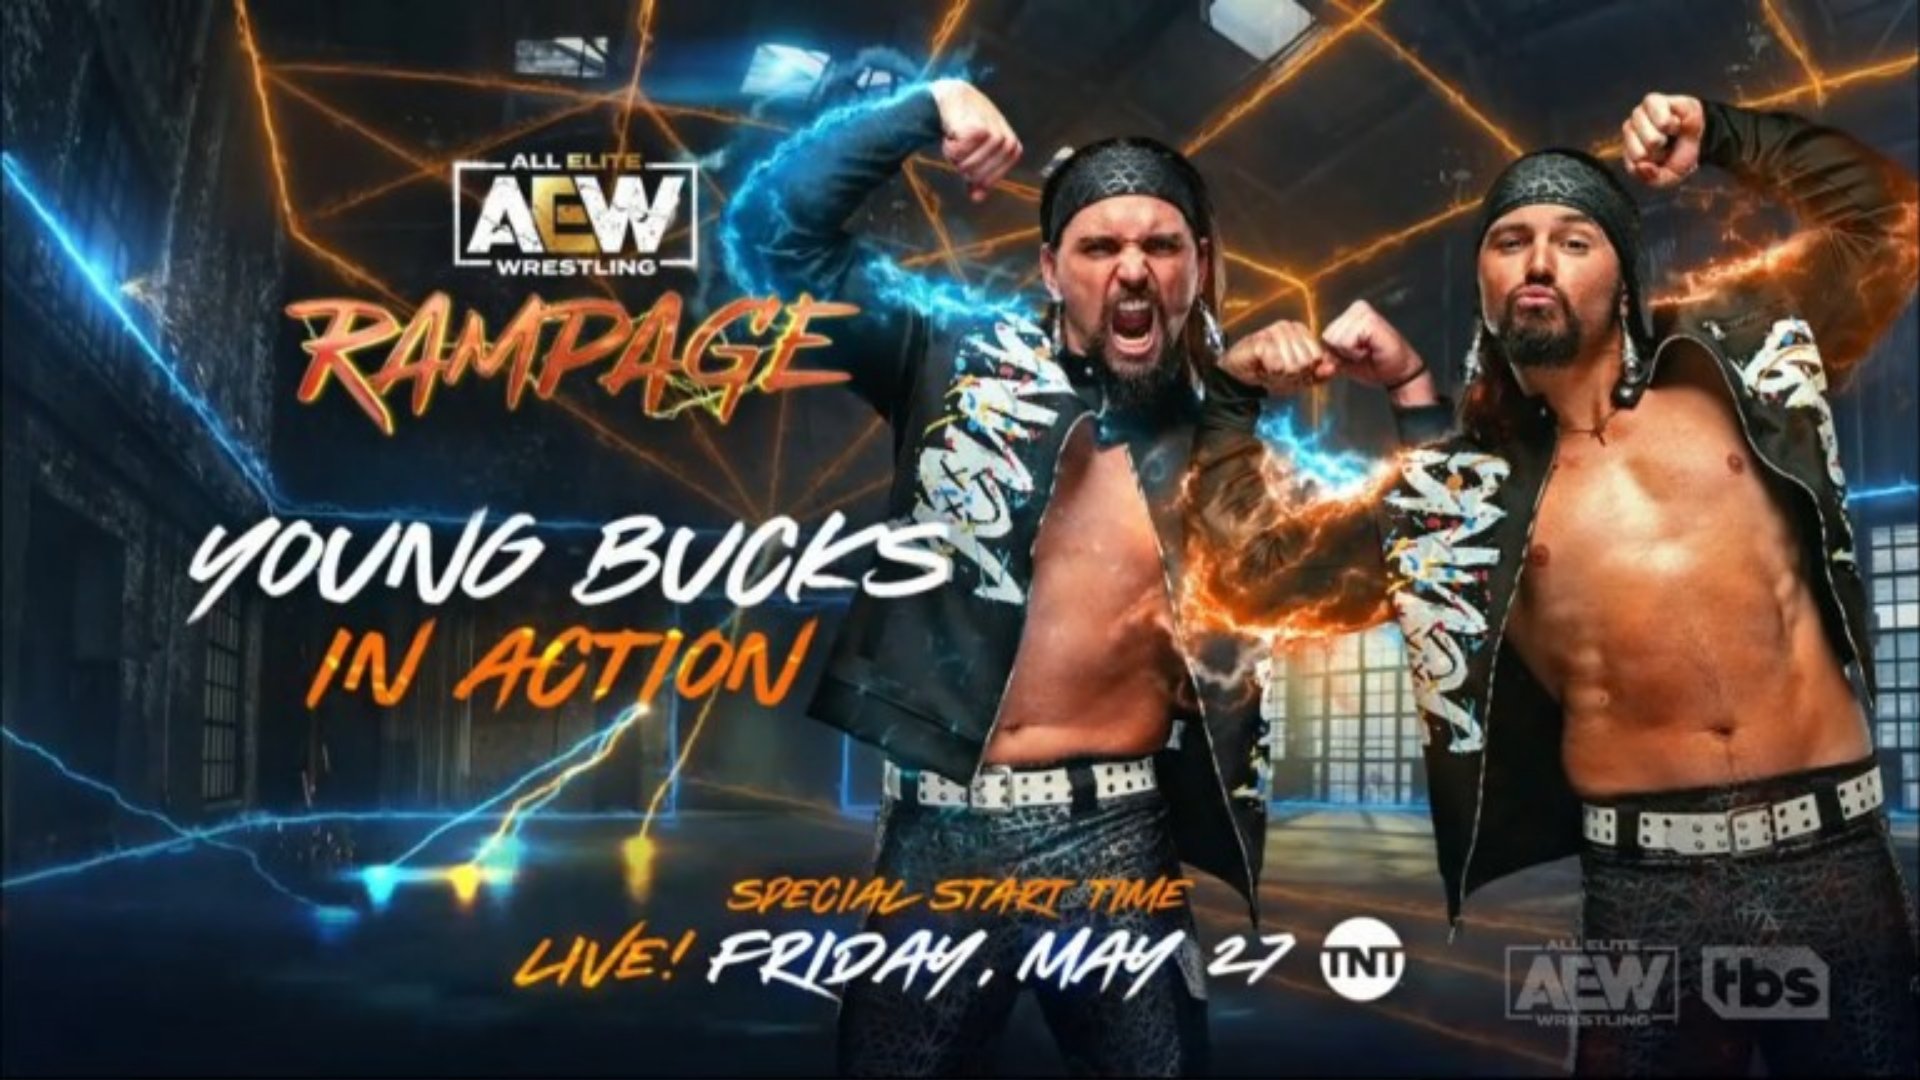 AEW Rampage for 5/27/22